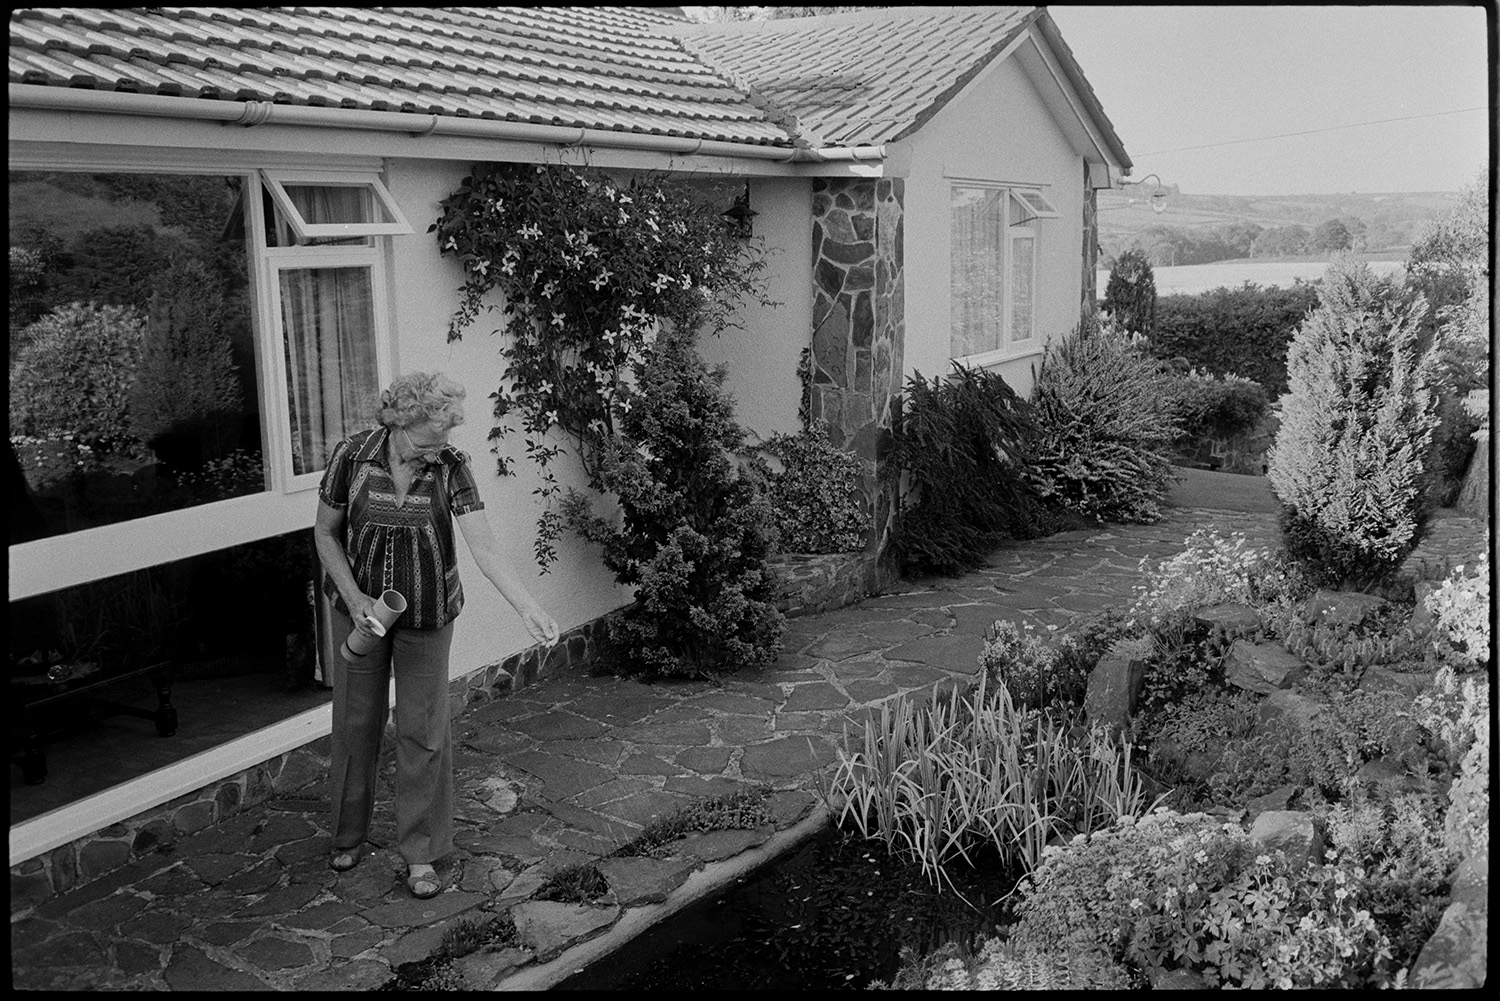 Woman sitting in garden of bungalow.
[Beatrice Nancekivel, also known as Beat, in front of her bungalow at The Patch, Woodtown, Dolton. She is spreading feed on the fish pond.]